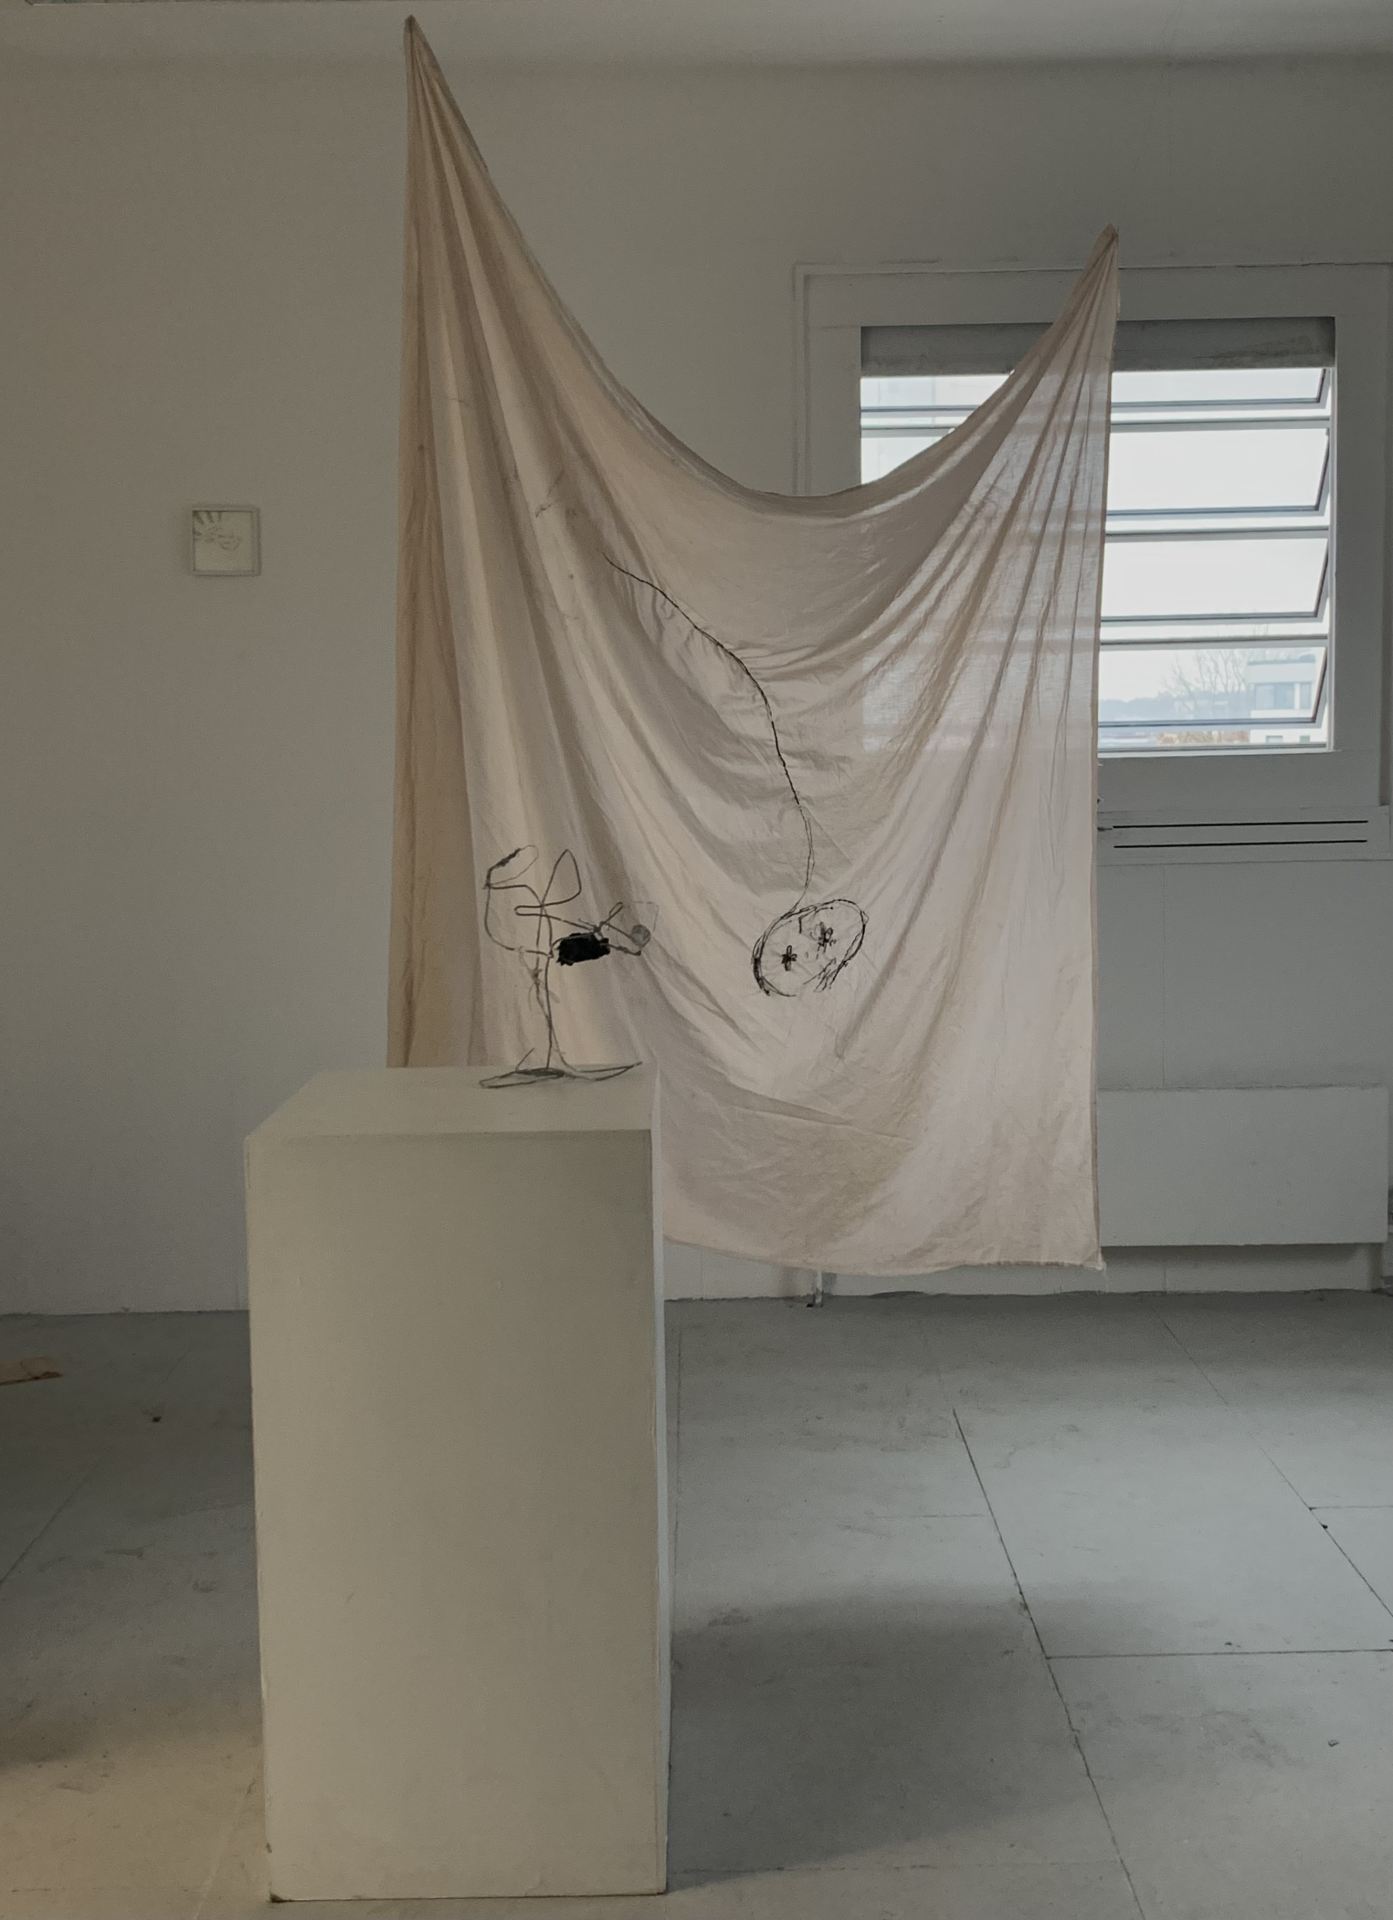 An image of an installation with a wire sculpture on a white plinth and a sheet that has been digitally embroidered hanging in front of a window.